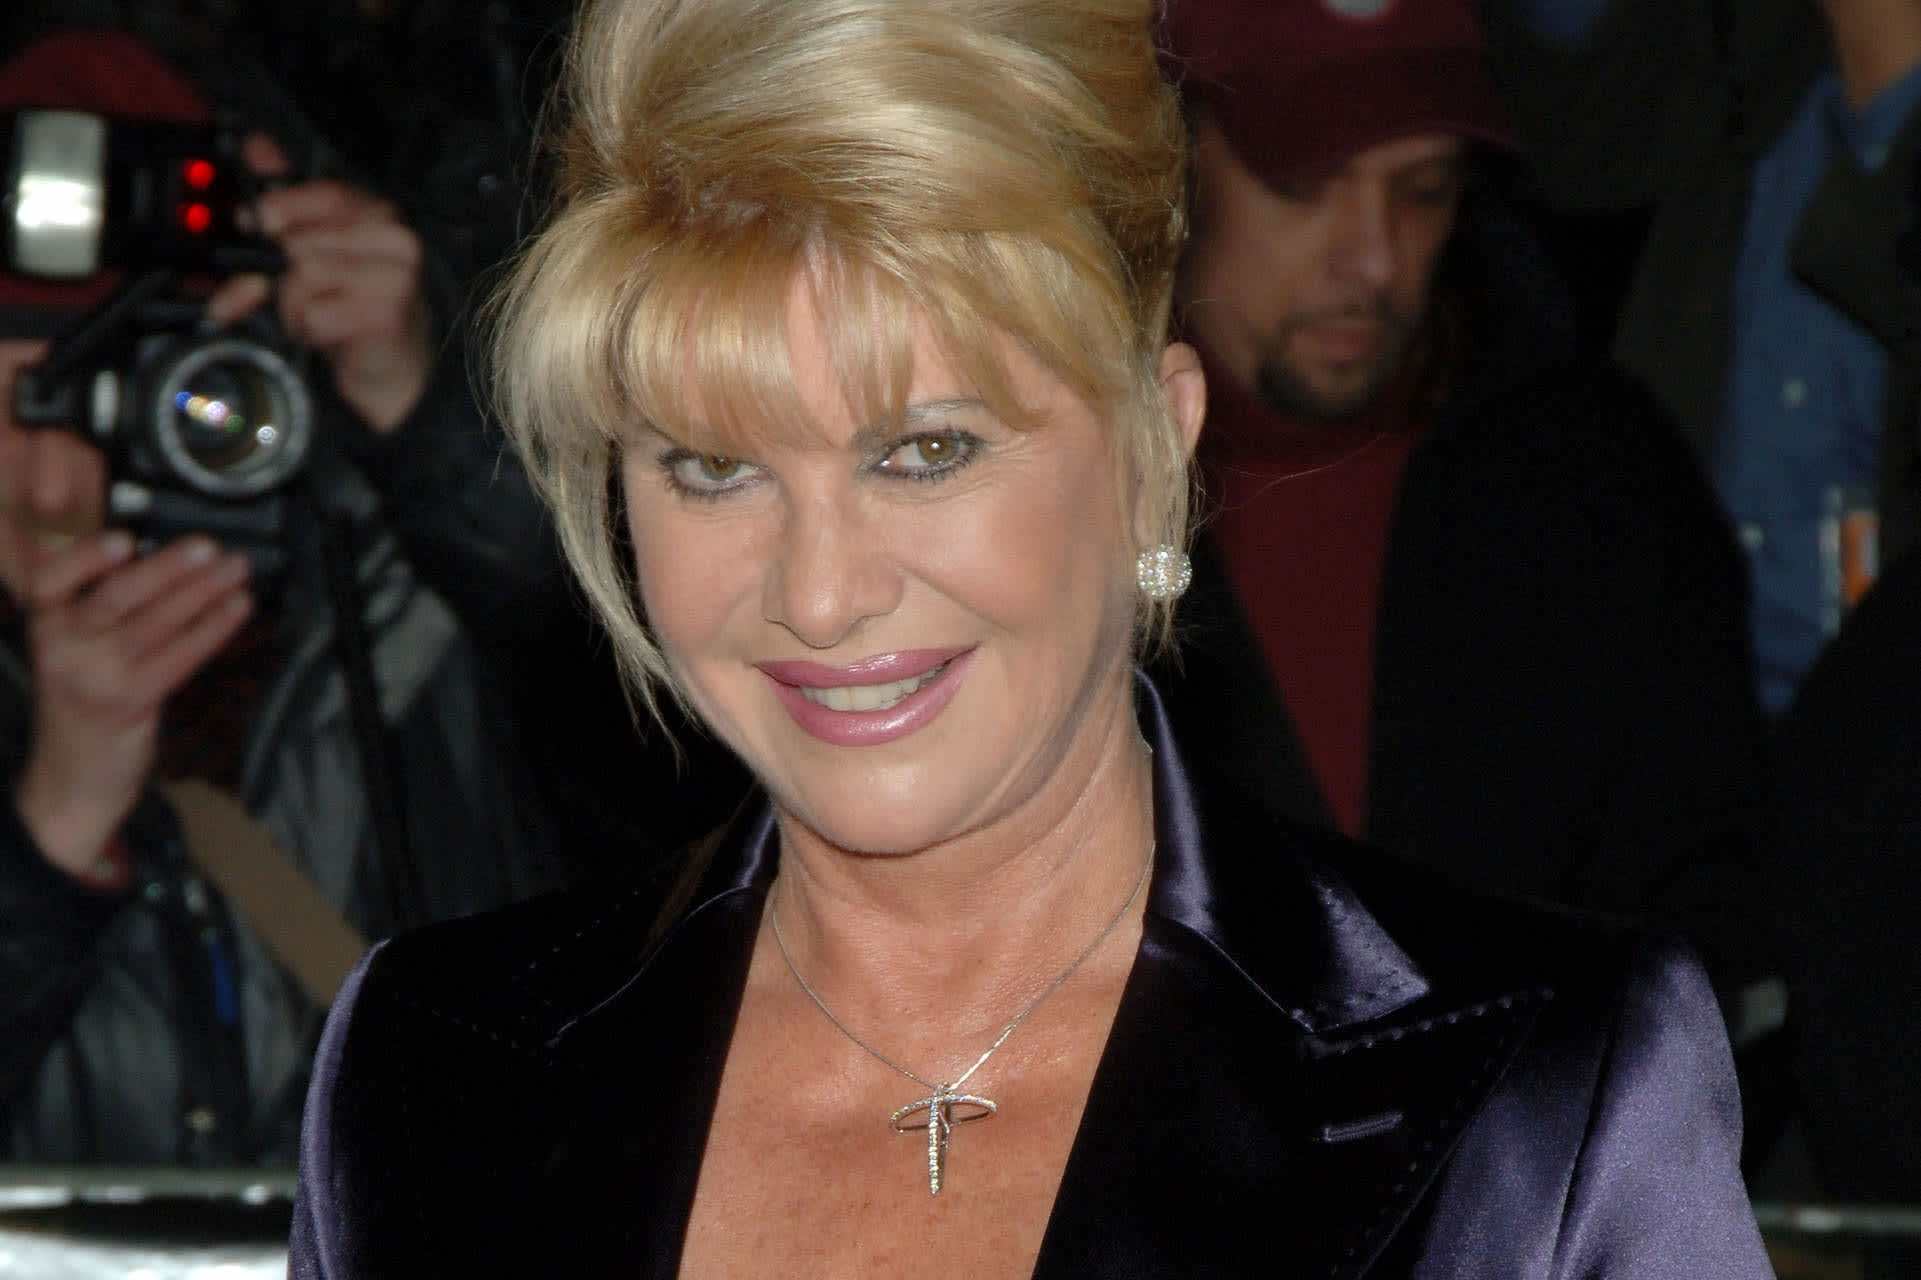 ivana-trump-died-from-accident-blunt-impact-injuries-new-york-city-medical-examiner-rules